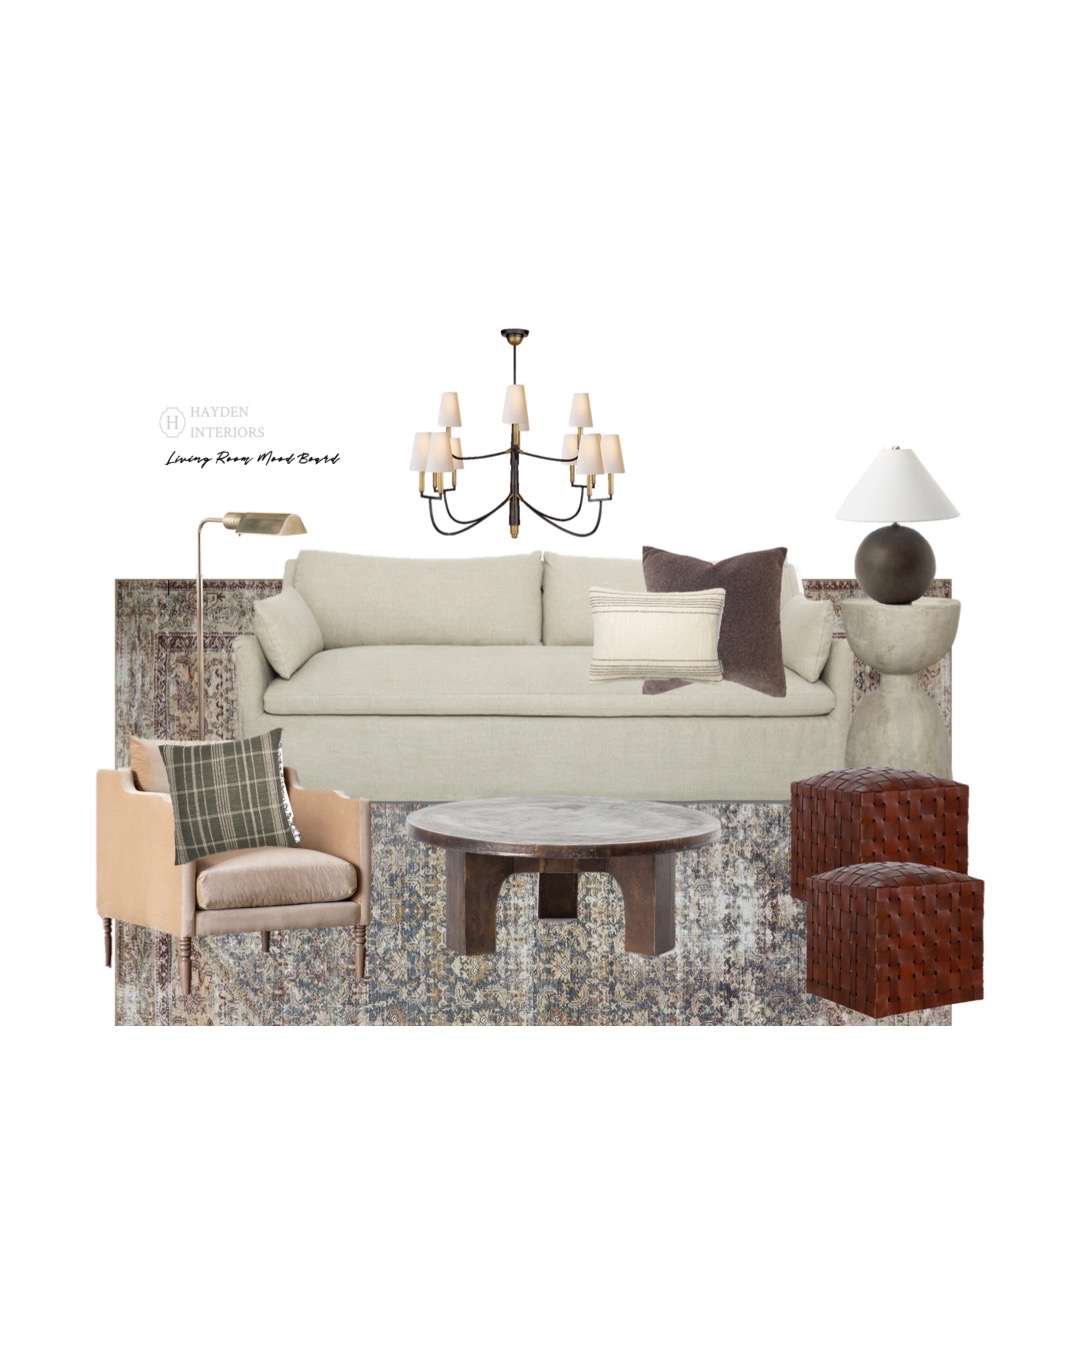 transtitional mood board, interior design, high end living room look, chandelier, sofa coffee table